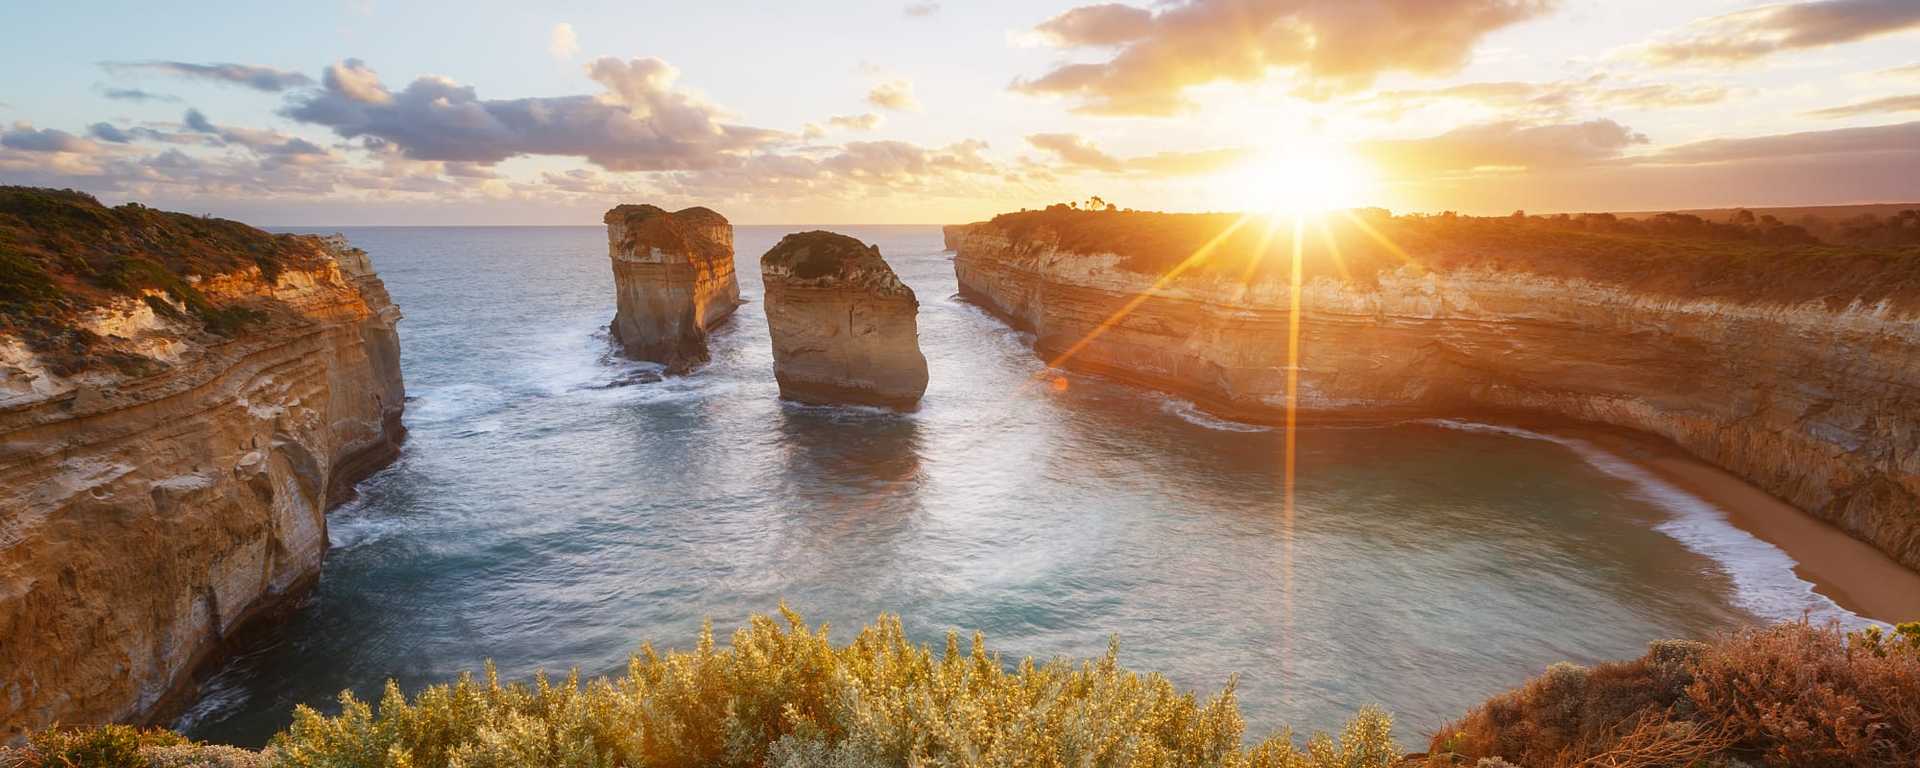 Sunsetting behind Loch Ard Gorge, part of Port Campbell National Park in Victoria, Australia